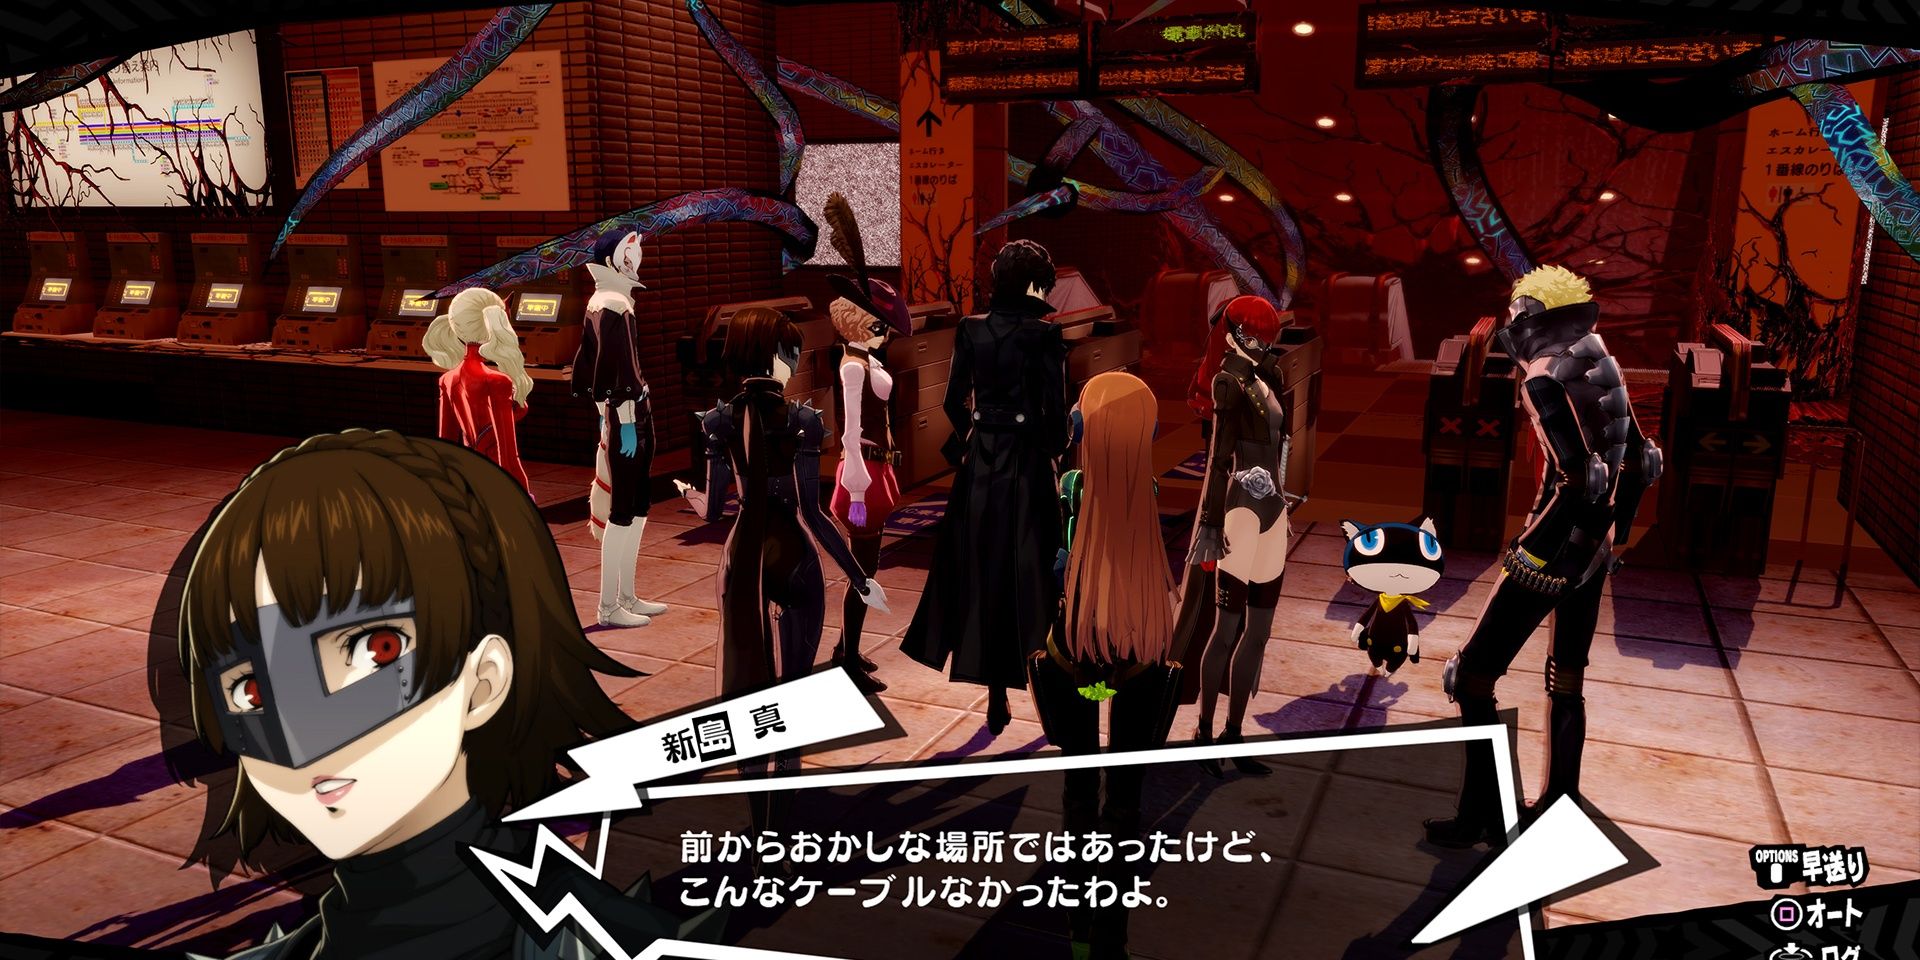 Mementos merging with the city of Tokyo in Persona 5